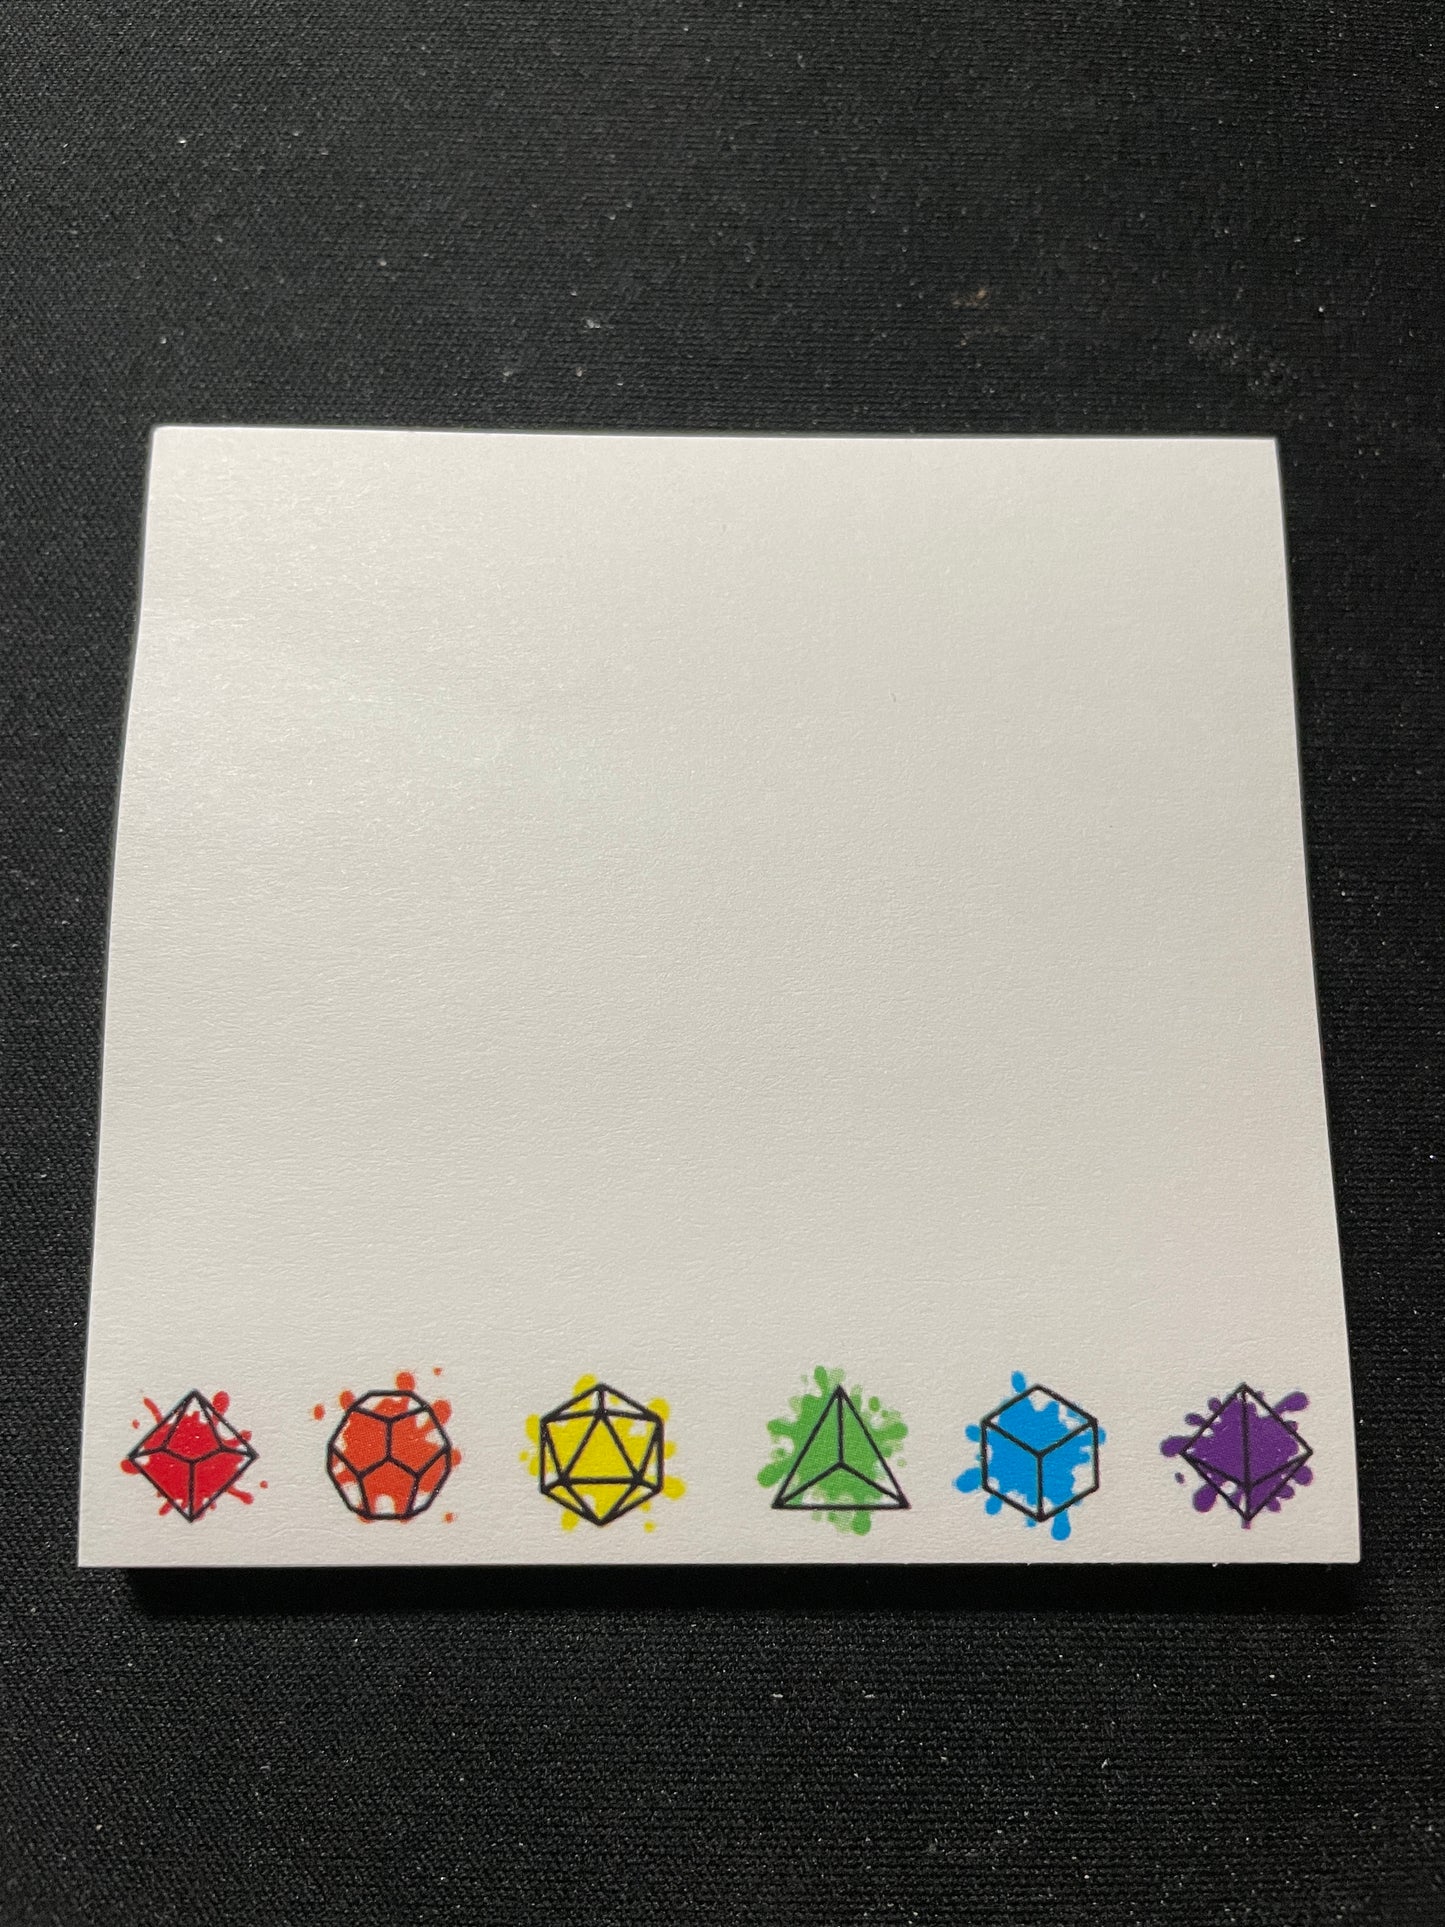 post it note - Dice, D&D, table top, polyhedral dice roll playing, game, gamer, dungeons and dragons, d6, d20, d4, d10, d100, d2, sticky note, stickynote, postit note, custom post it notes, post it brand